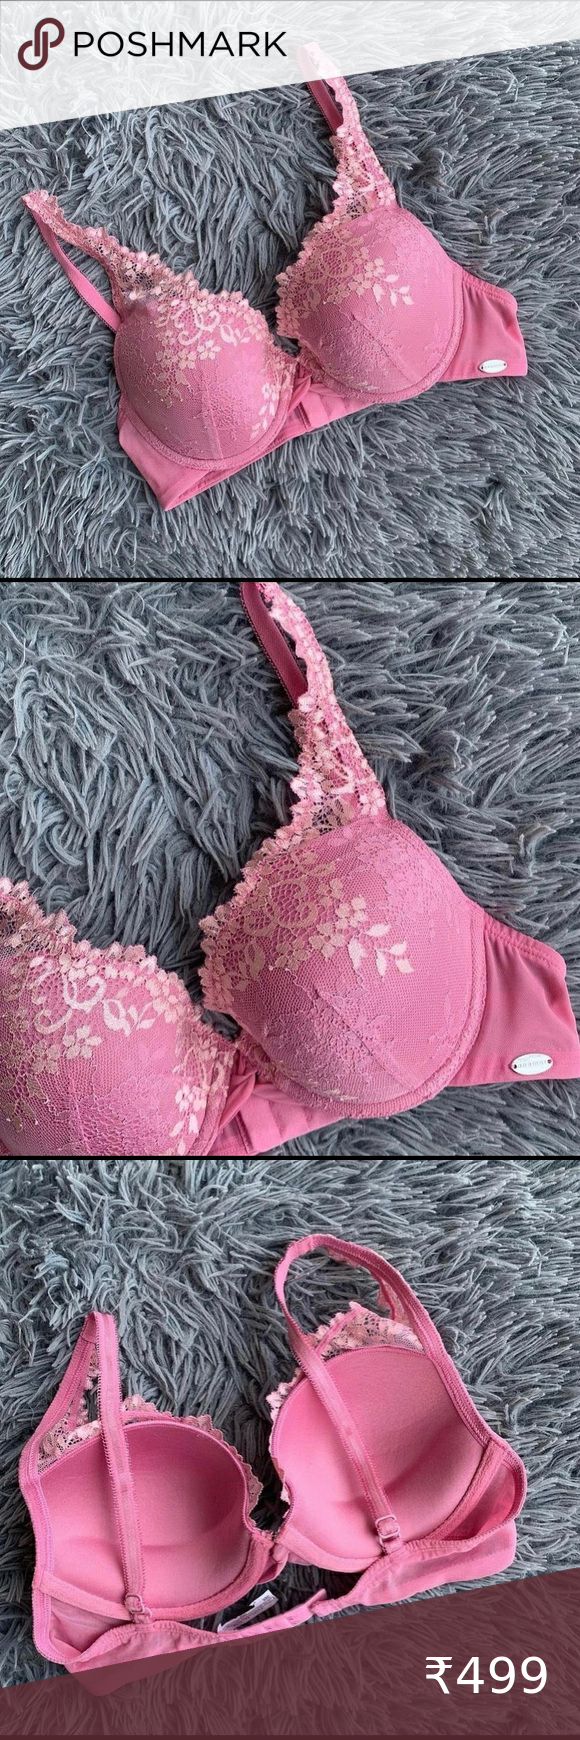 Enamor Bra: Finding the Perfect Fit for Your Comfort